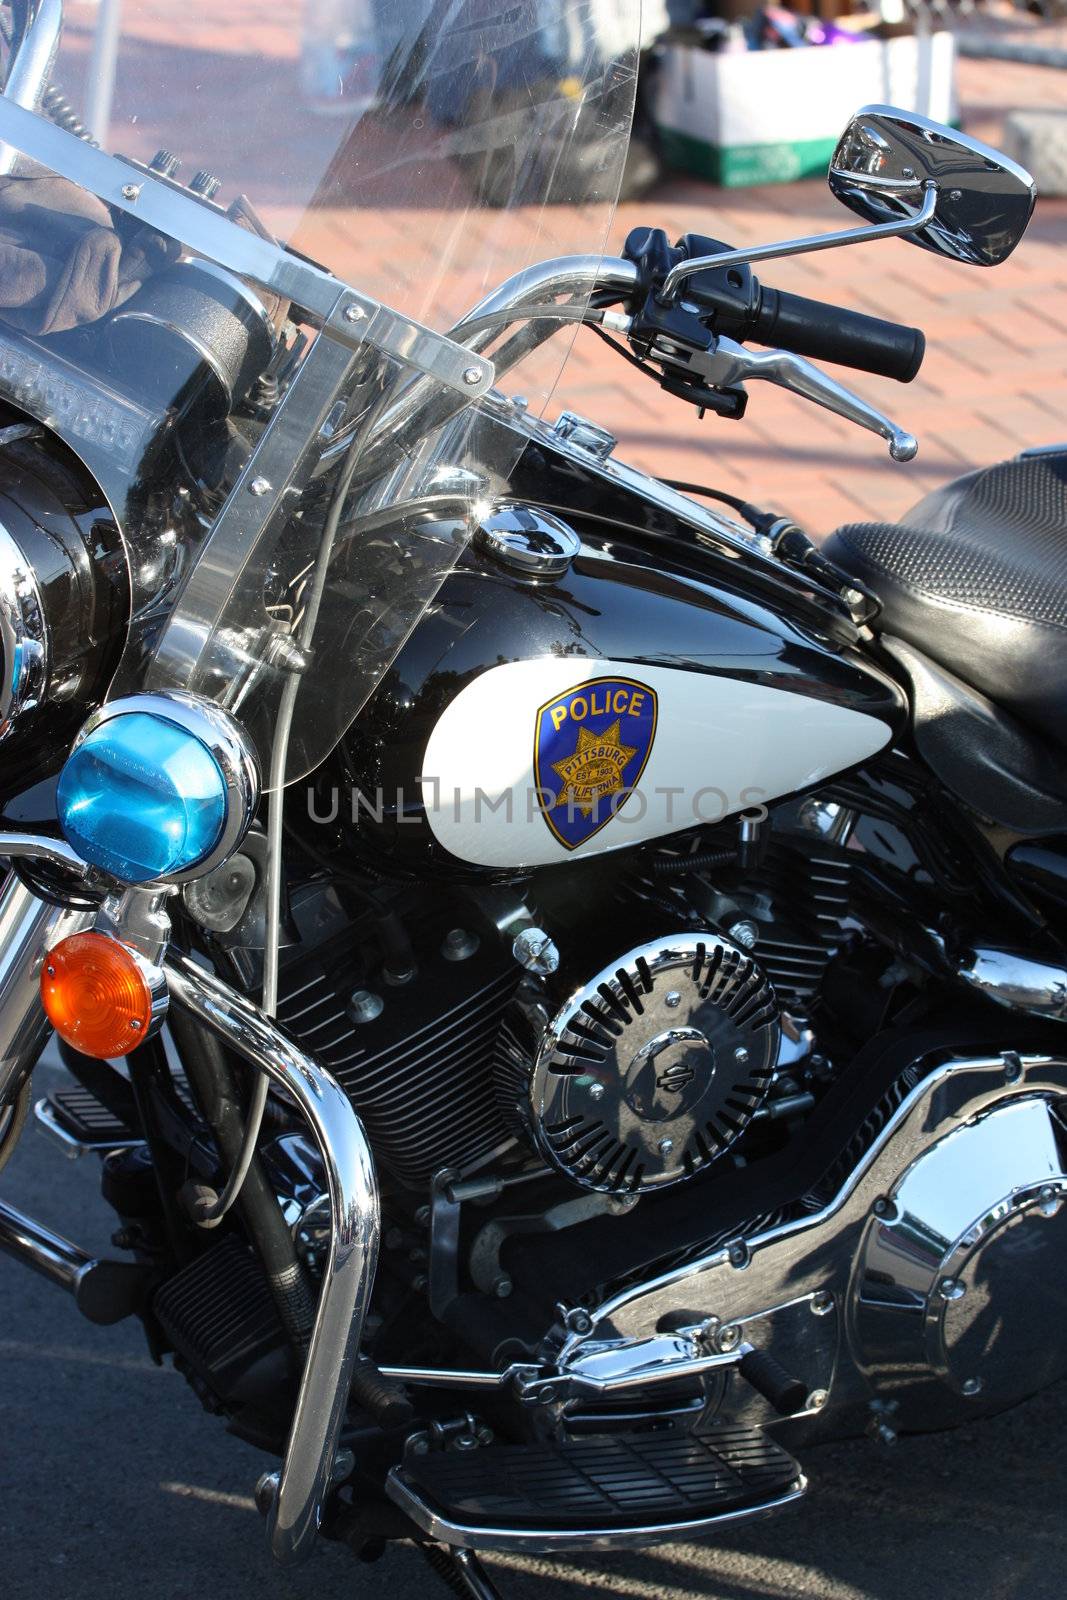 Police Motorcycle by MichaelFelix